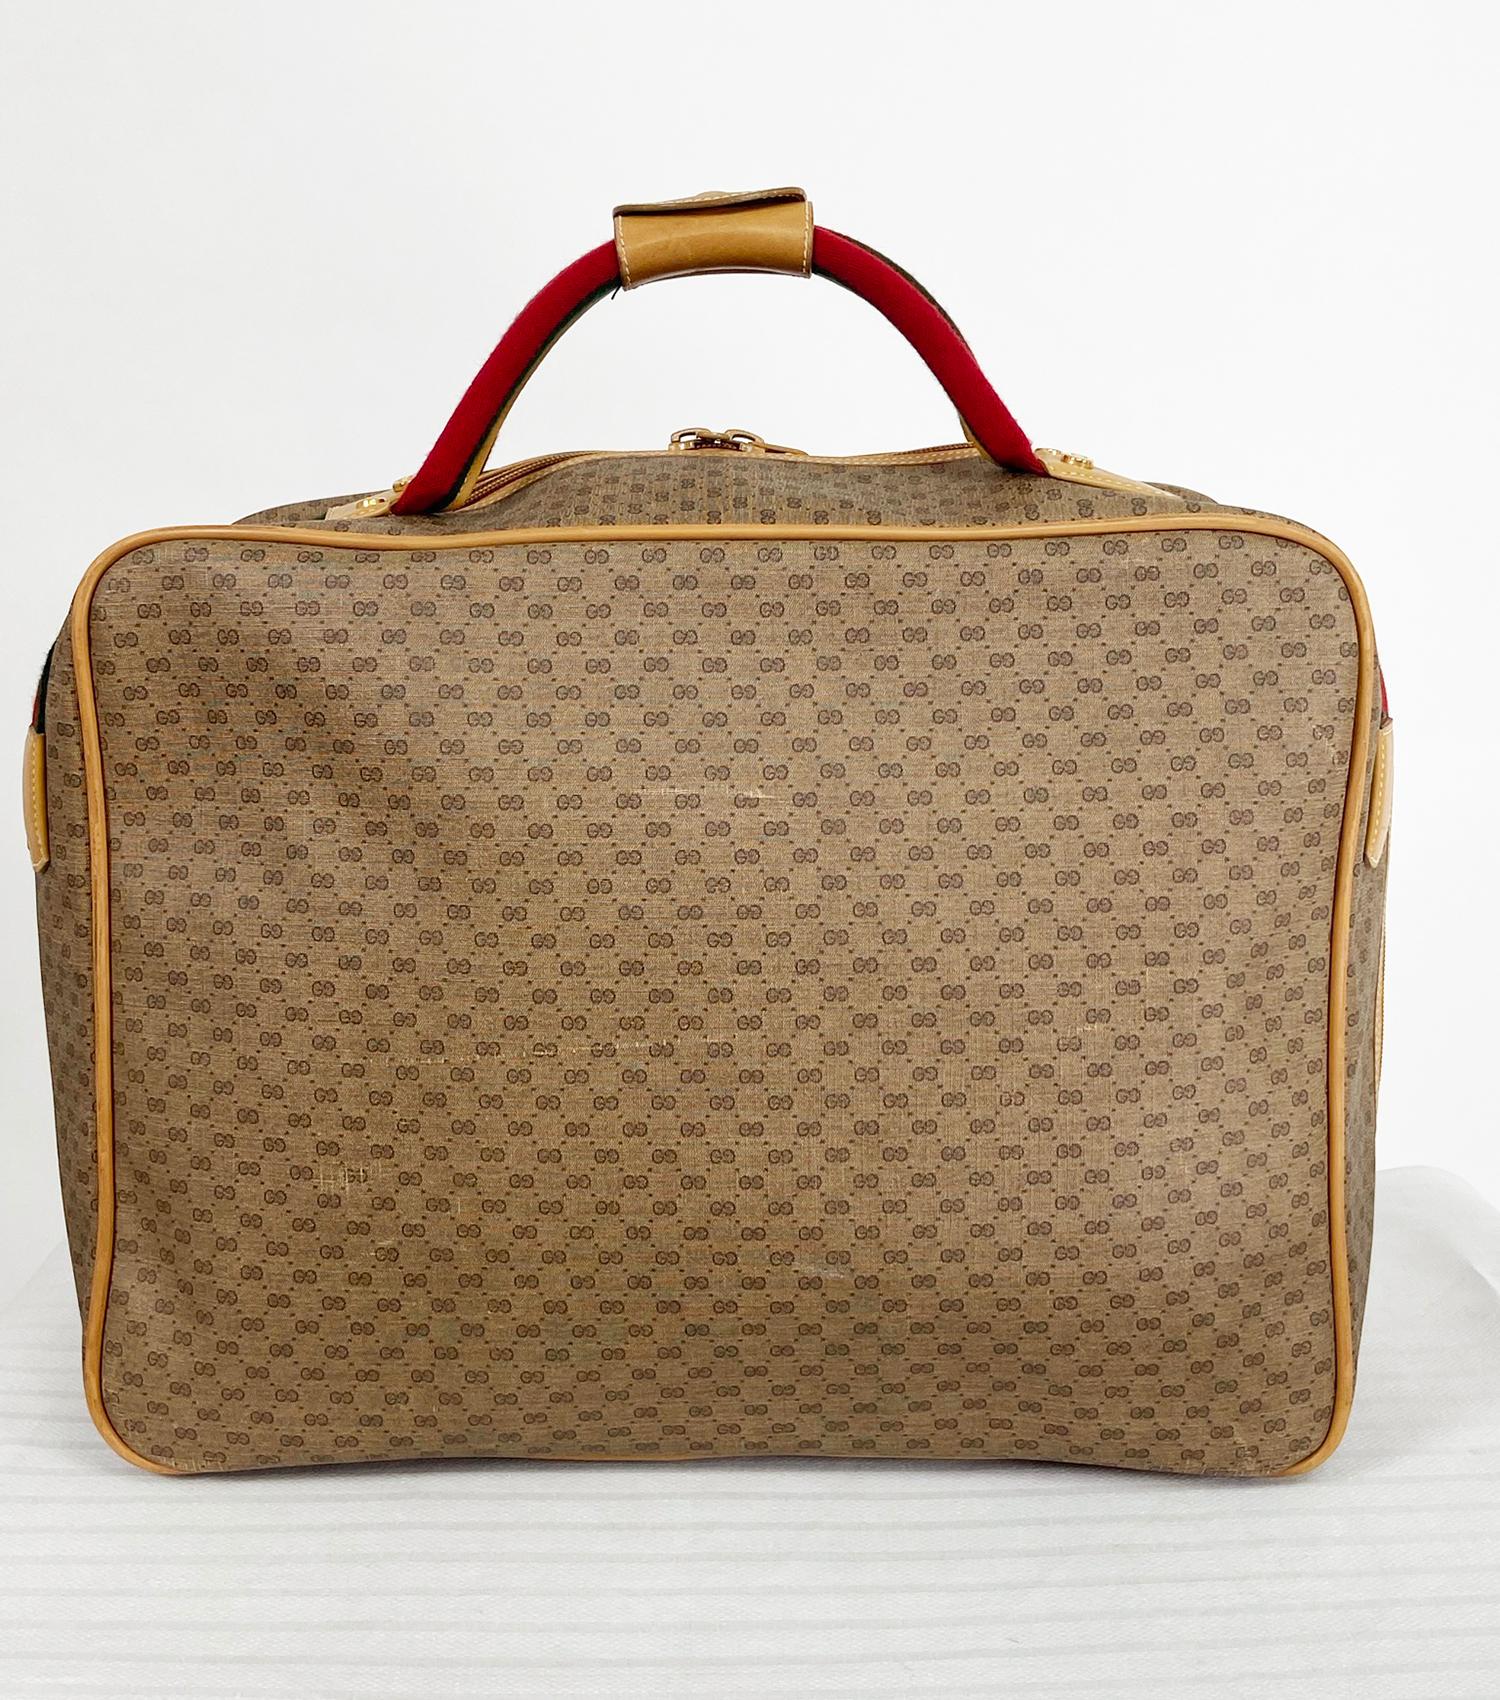 Vintage Gucci monogram vinyl canvas, carry on suit case. Double red & green web handles in red & green, tan leather trim hold close with gold snap. The bag is perfect for carry on. Unzips from front center to back sides. Interior is canvas and clean